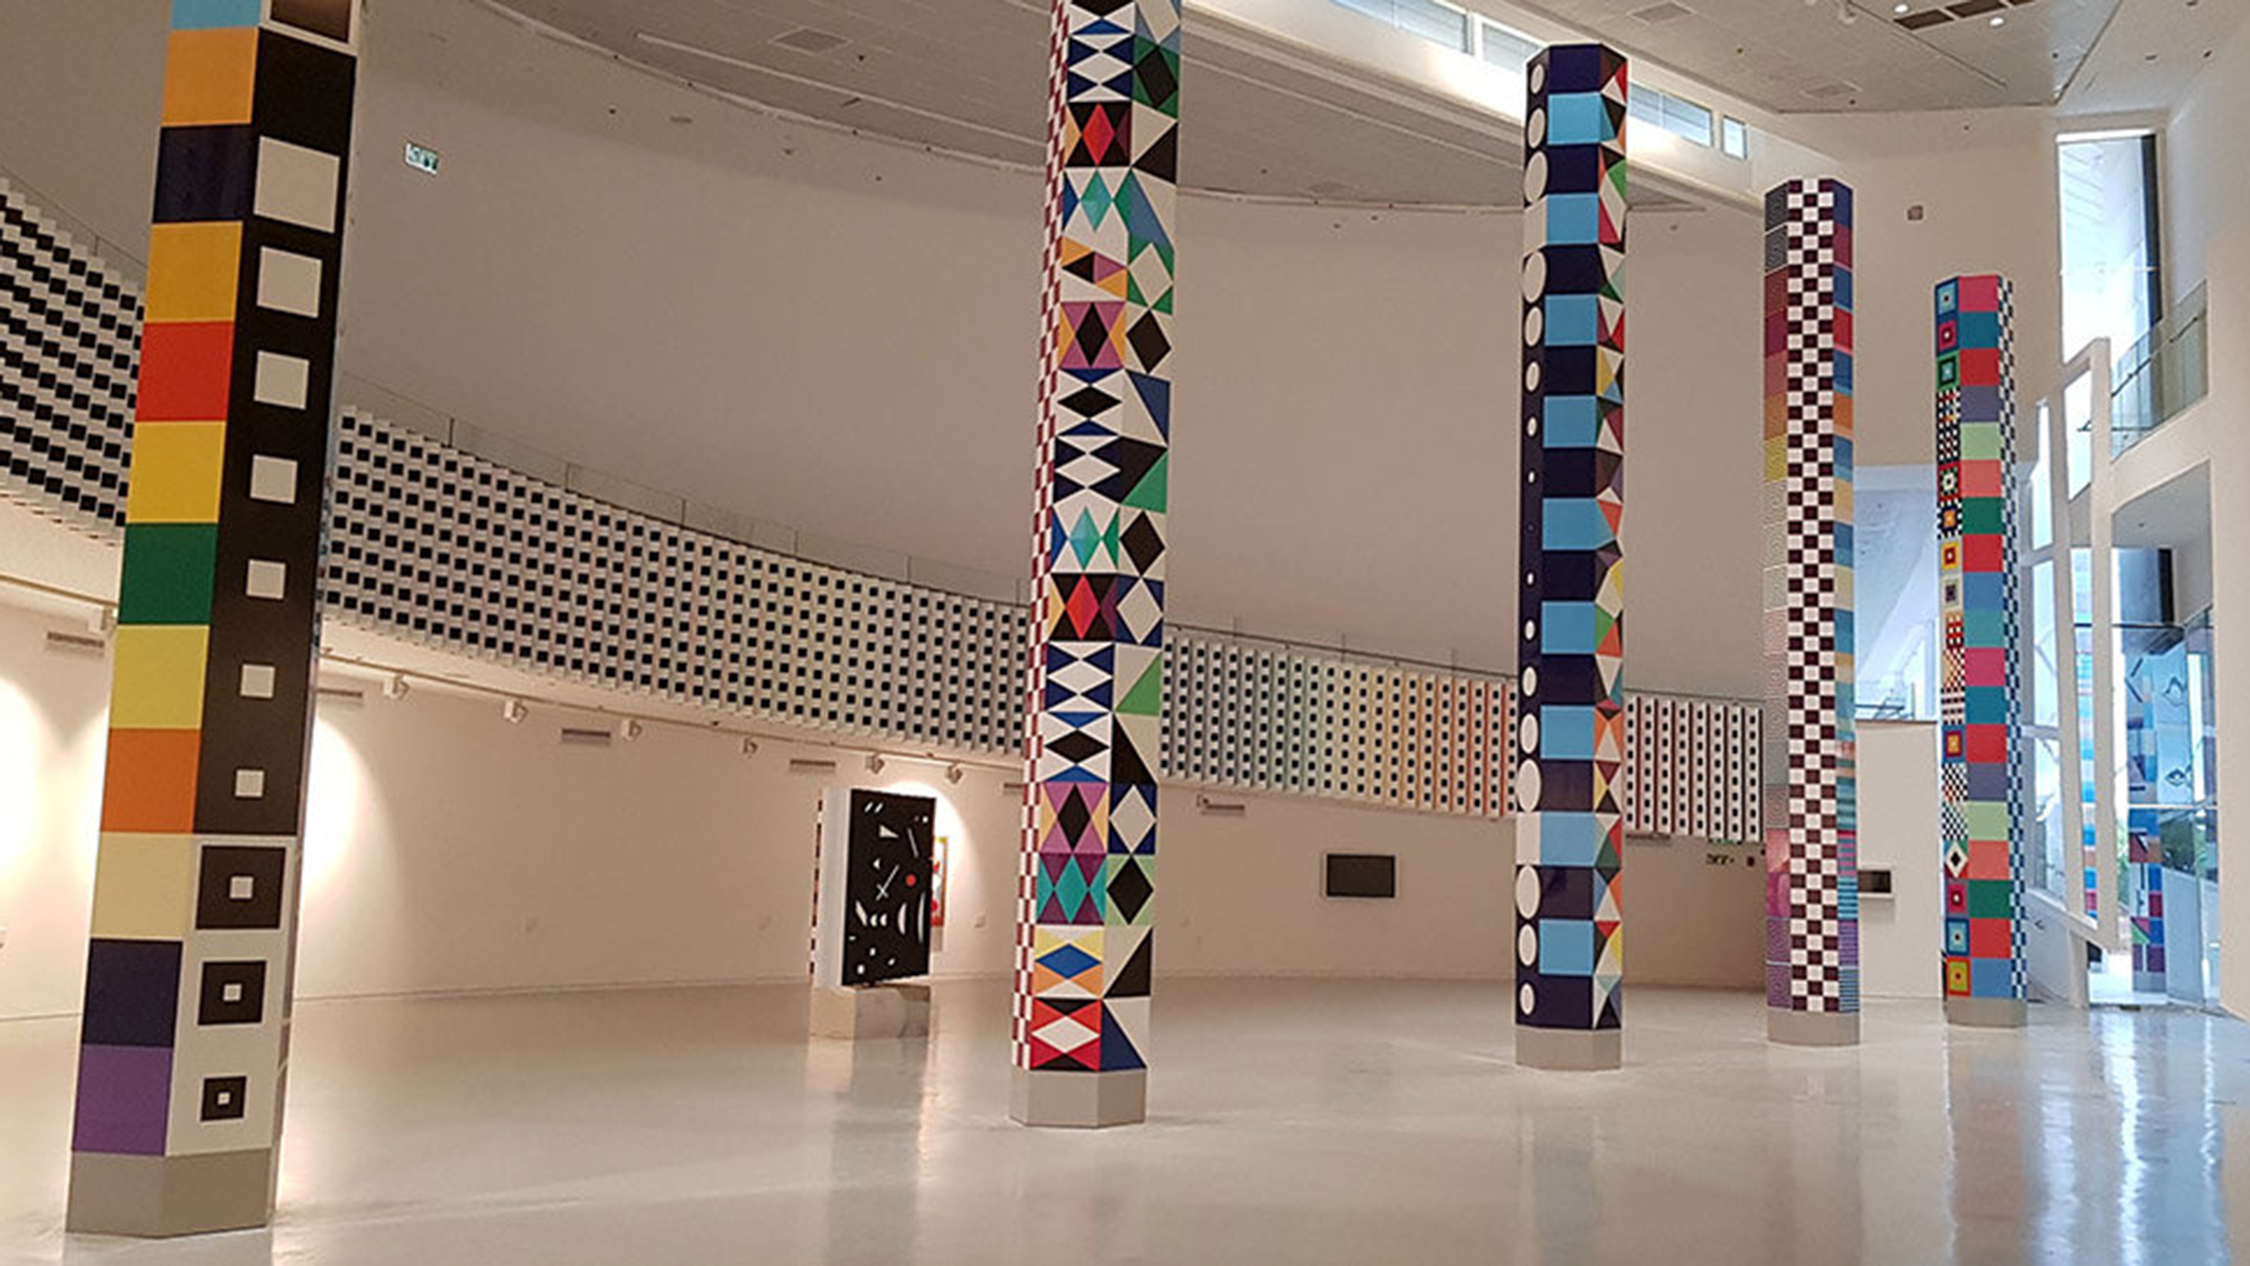 Agam Art Museum | Museums in Rishon LeTsion, Israel